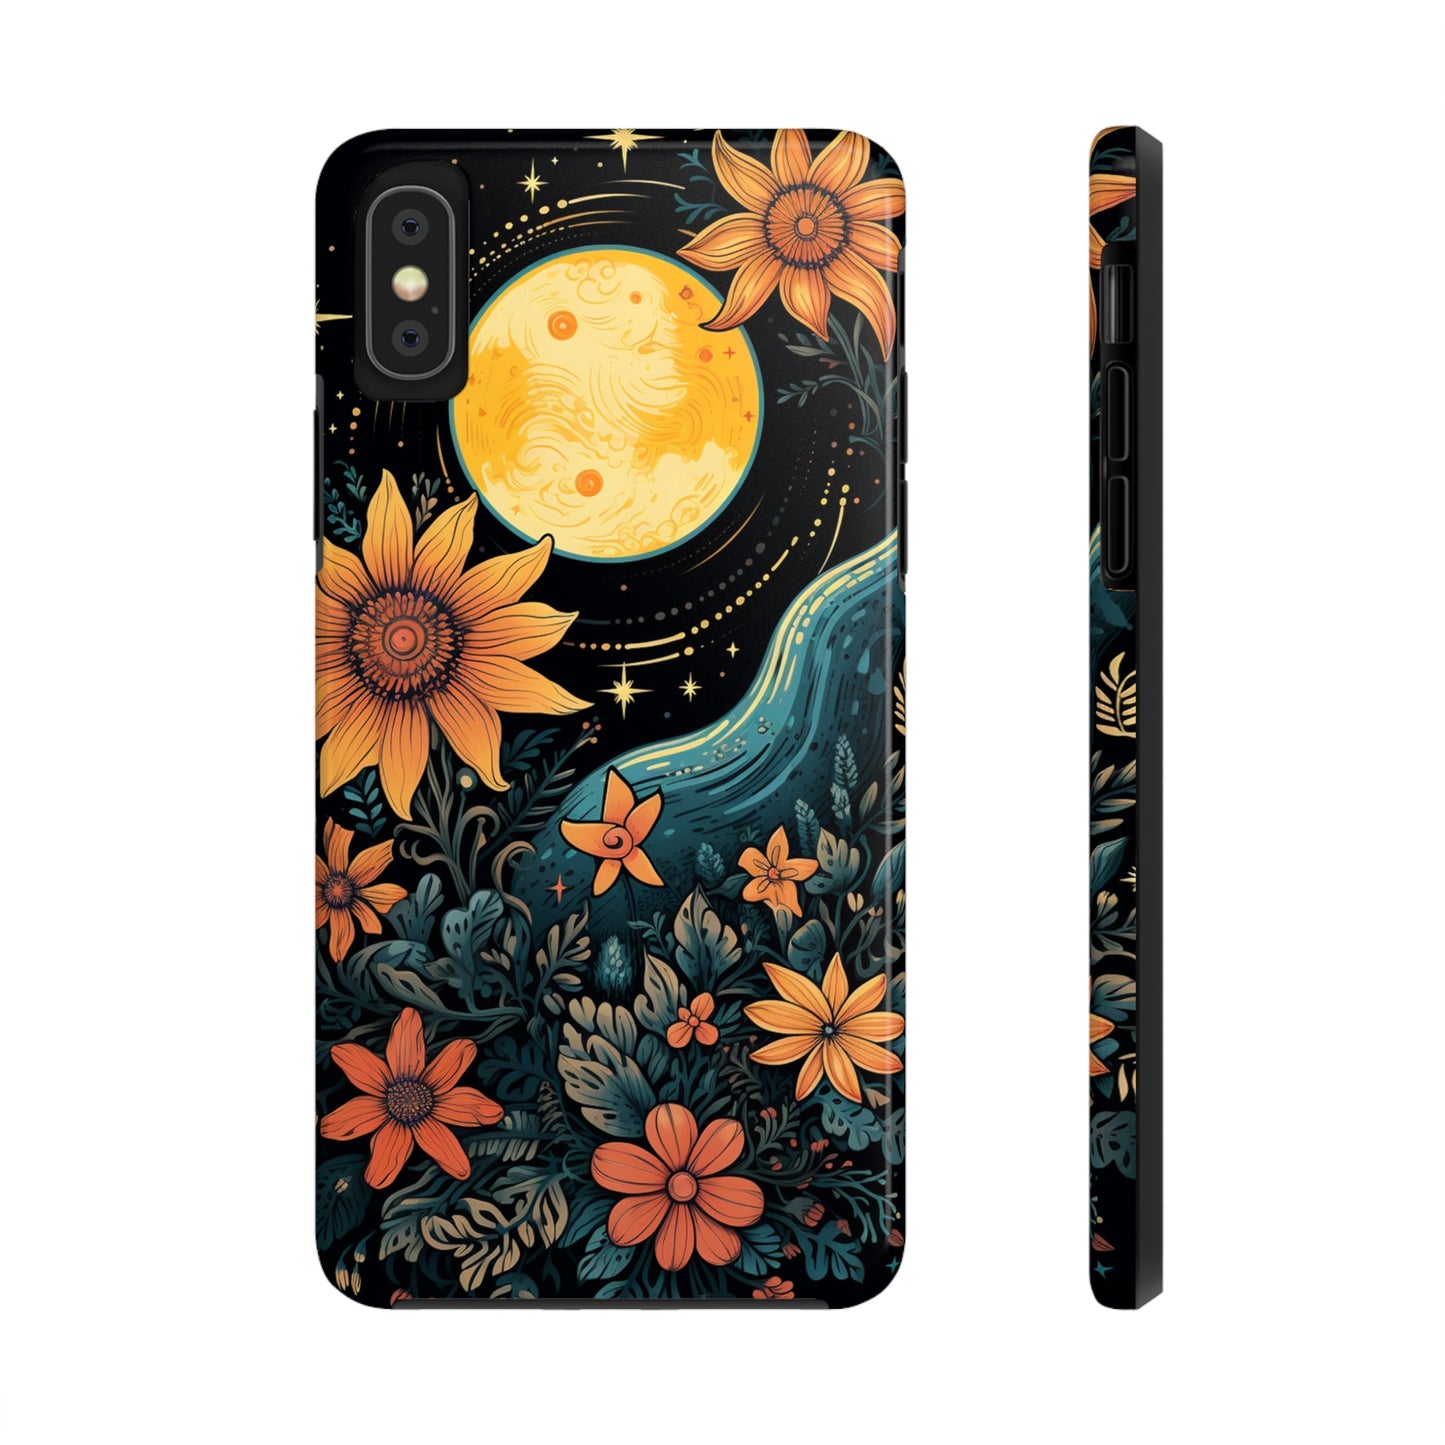 Boho-cottagecore blend iPhone case with sun, moon, and star motifs